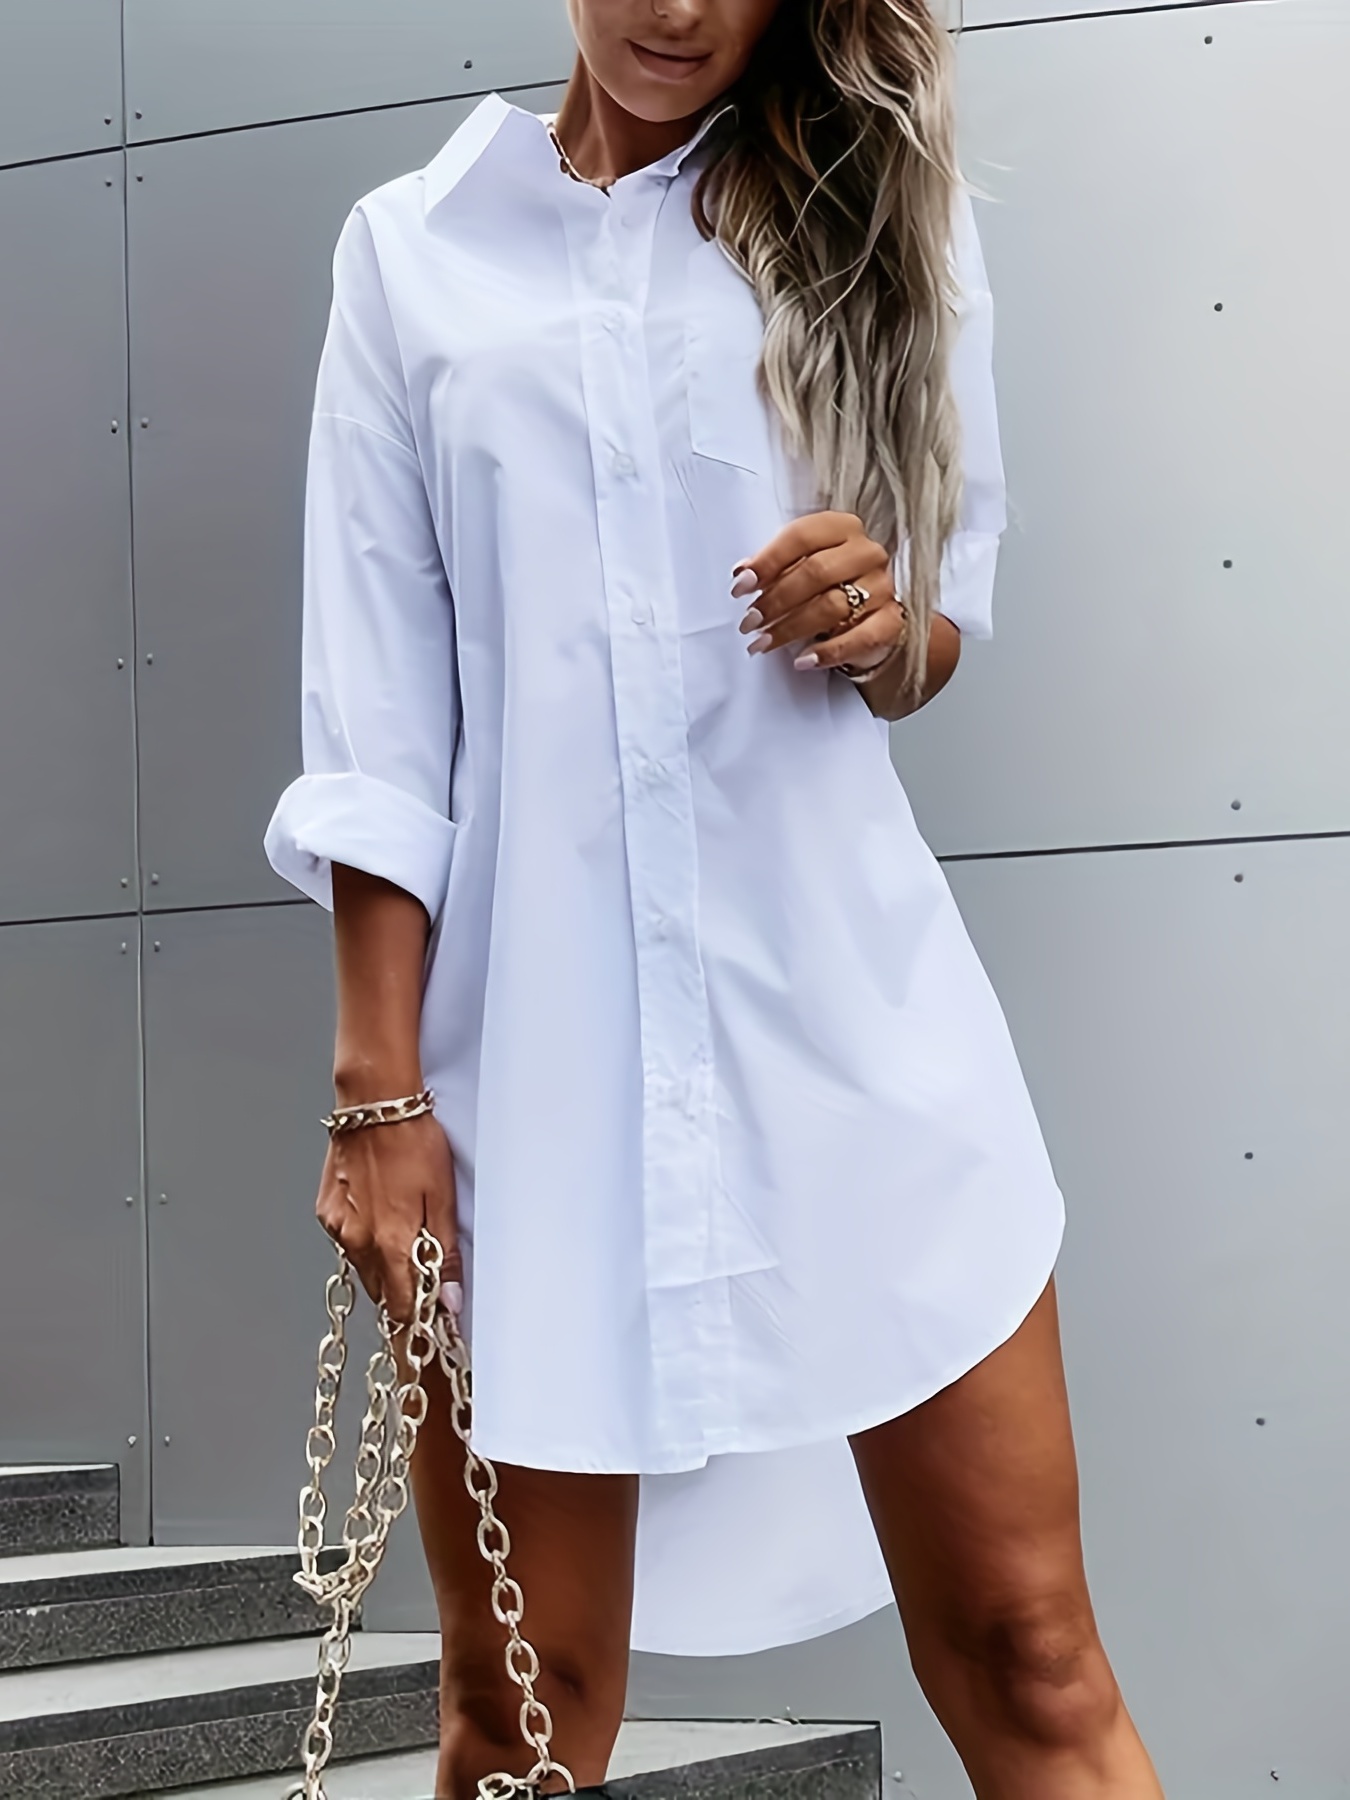 solid color button front shirt dress casual long sleeve lapel dress for spring fall womens clothing details 1